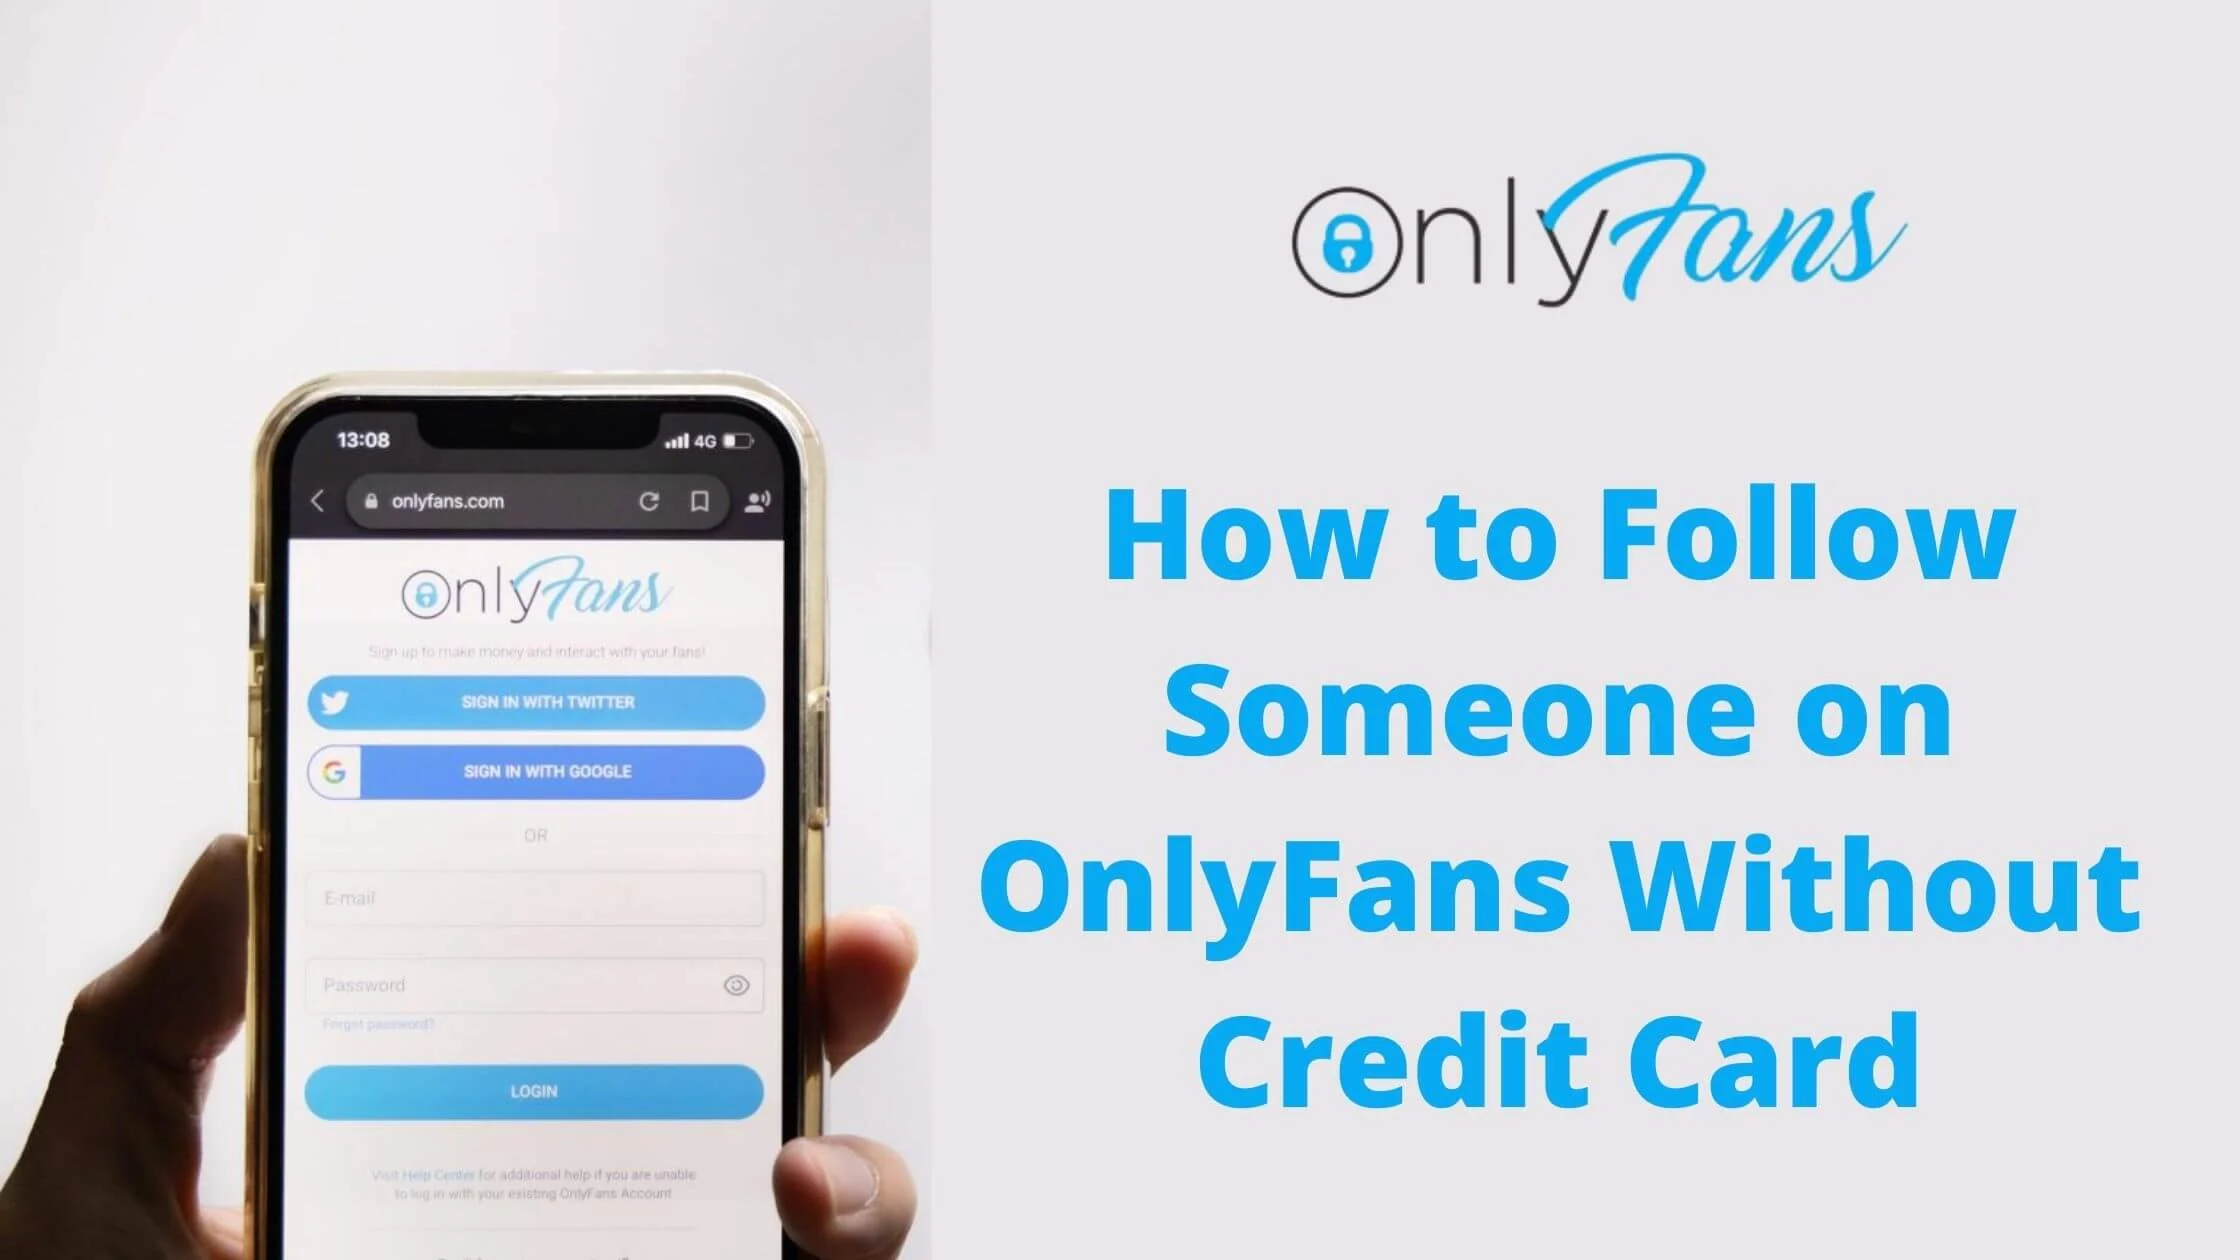 Can you use visa gift cards for only fans